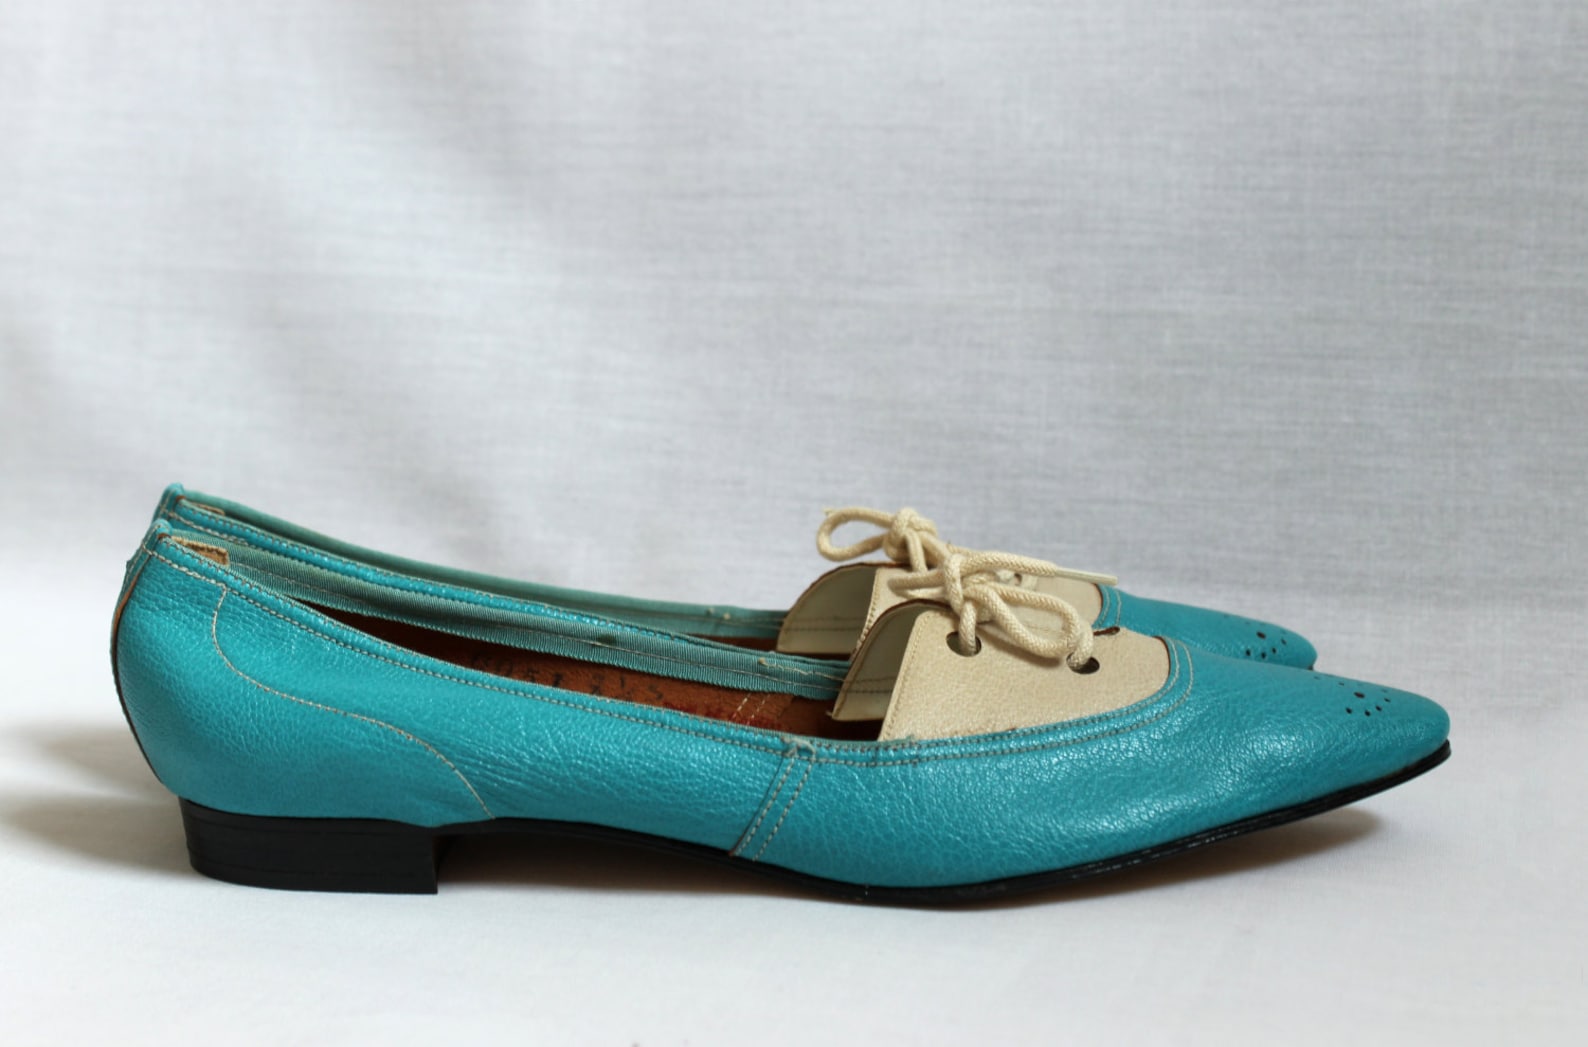 Vintage Chic Teal Flats//women's Classy Leather Oxfords - Etsy